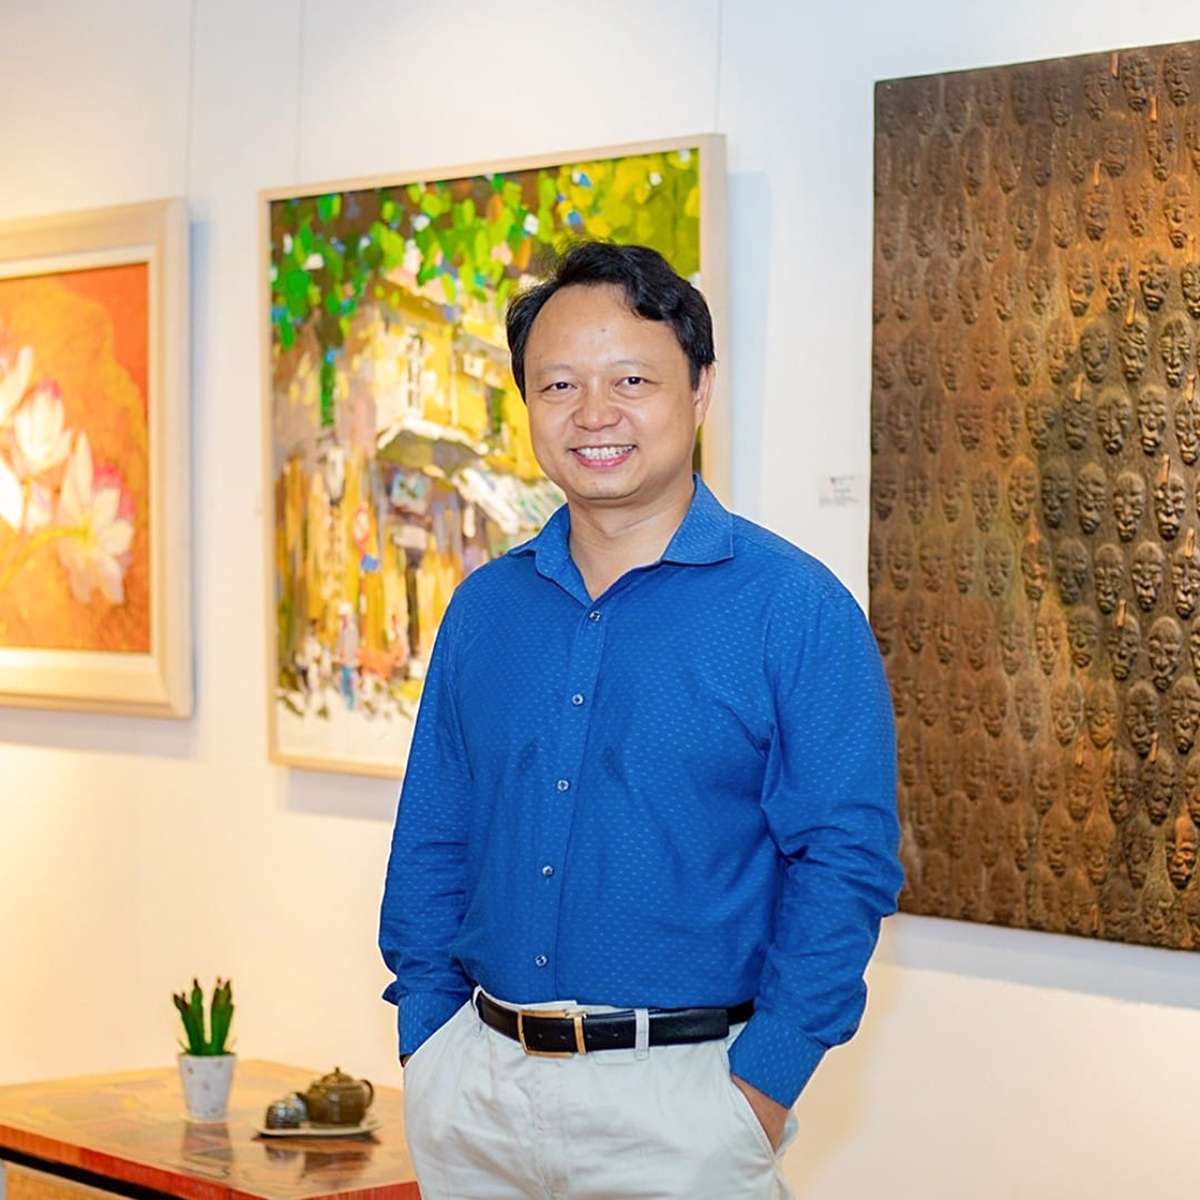 Mr. Henry Le - Founder of Indochina Tours